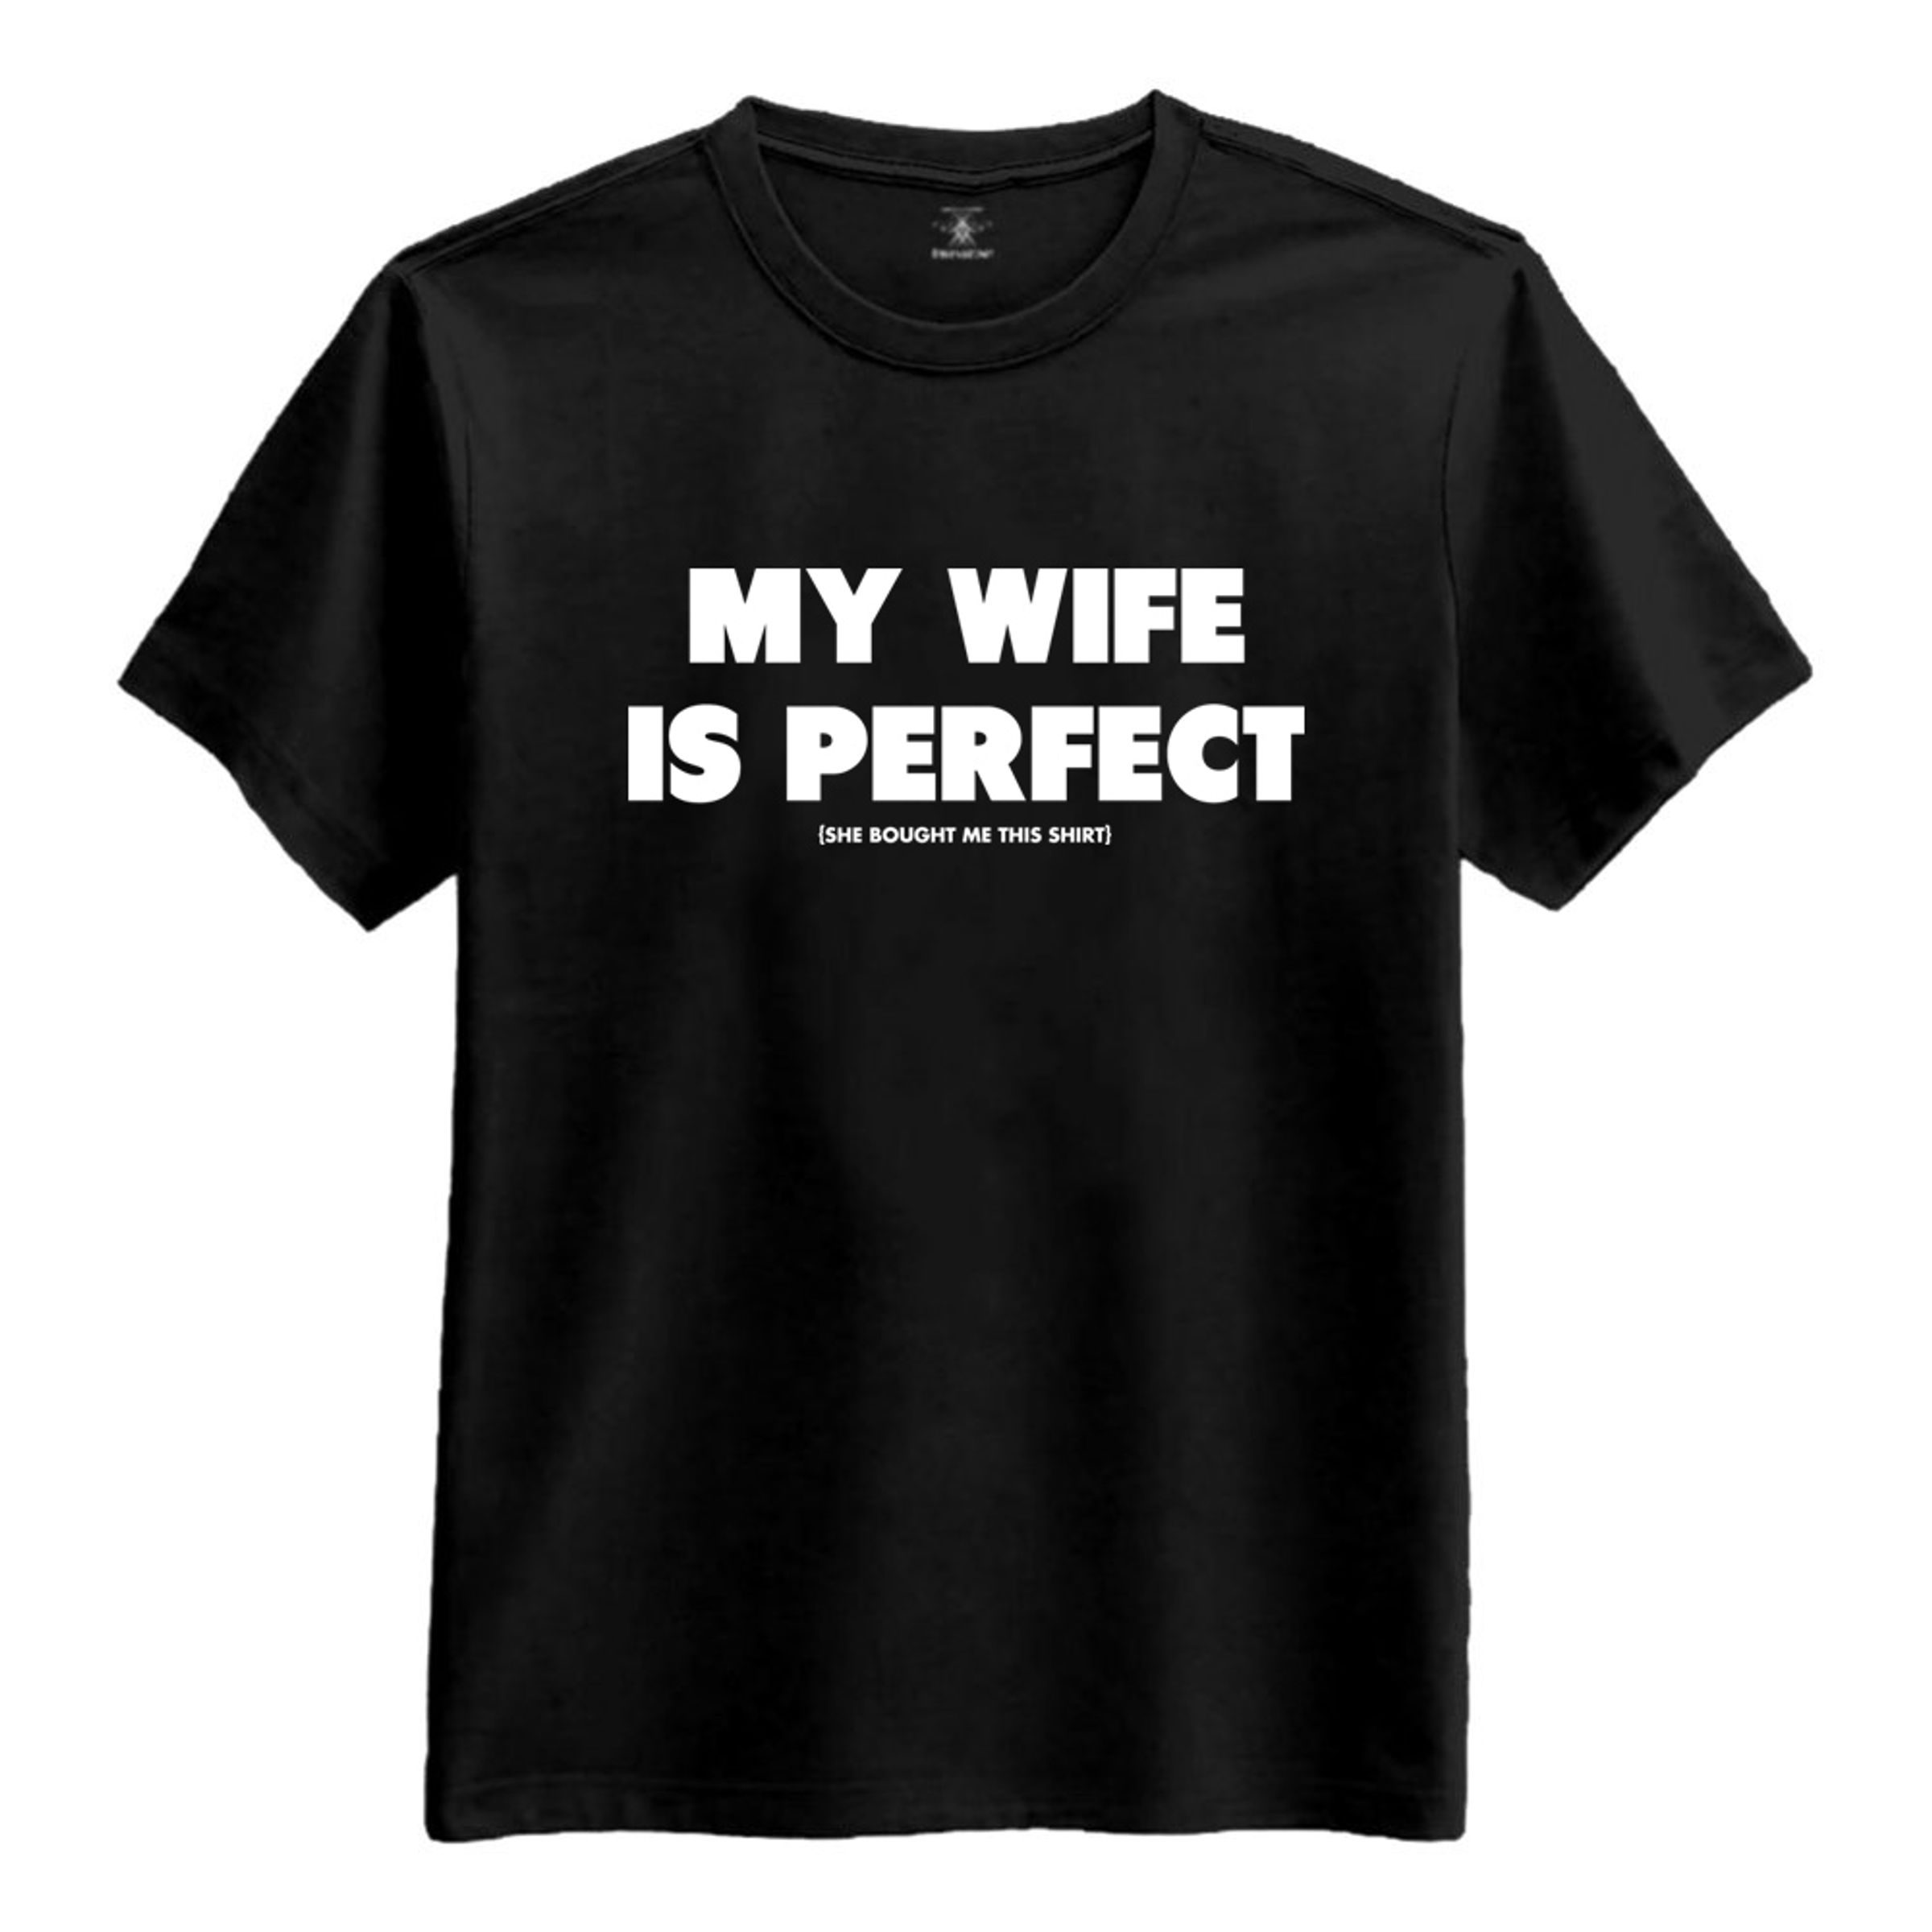 Läs mer om My Wife Is Perfect T-Shirt - X-Large